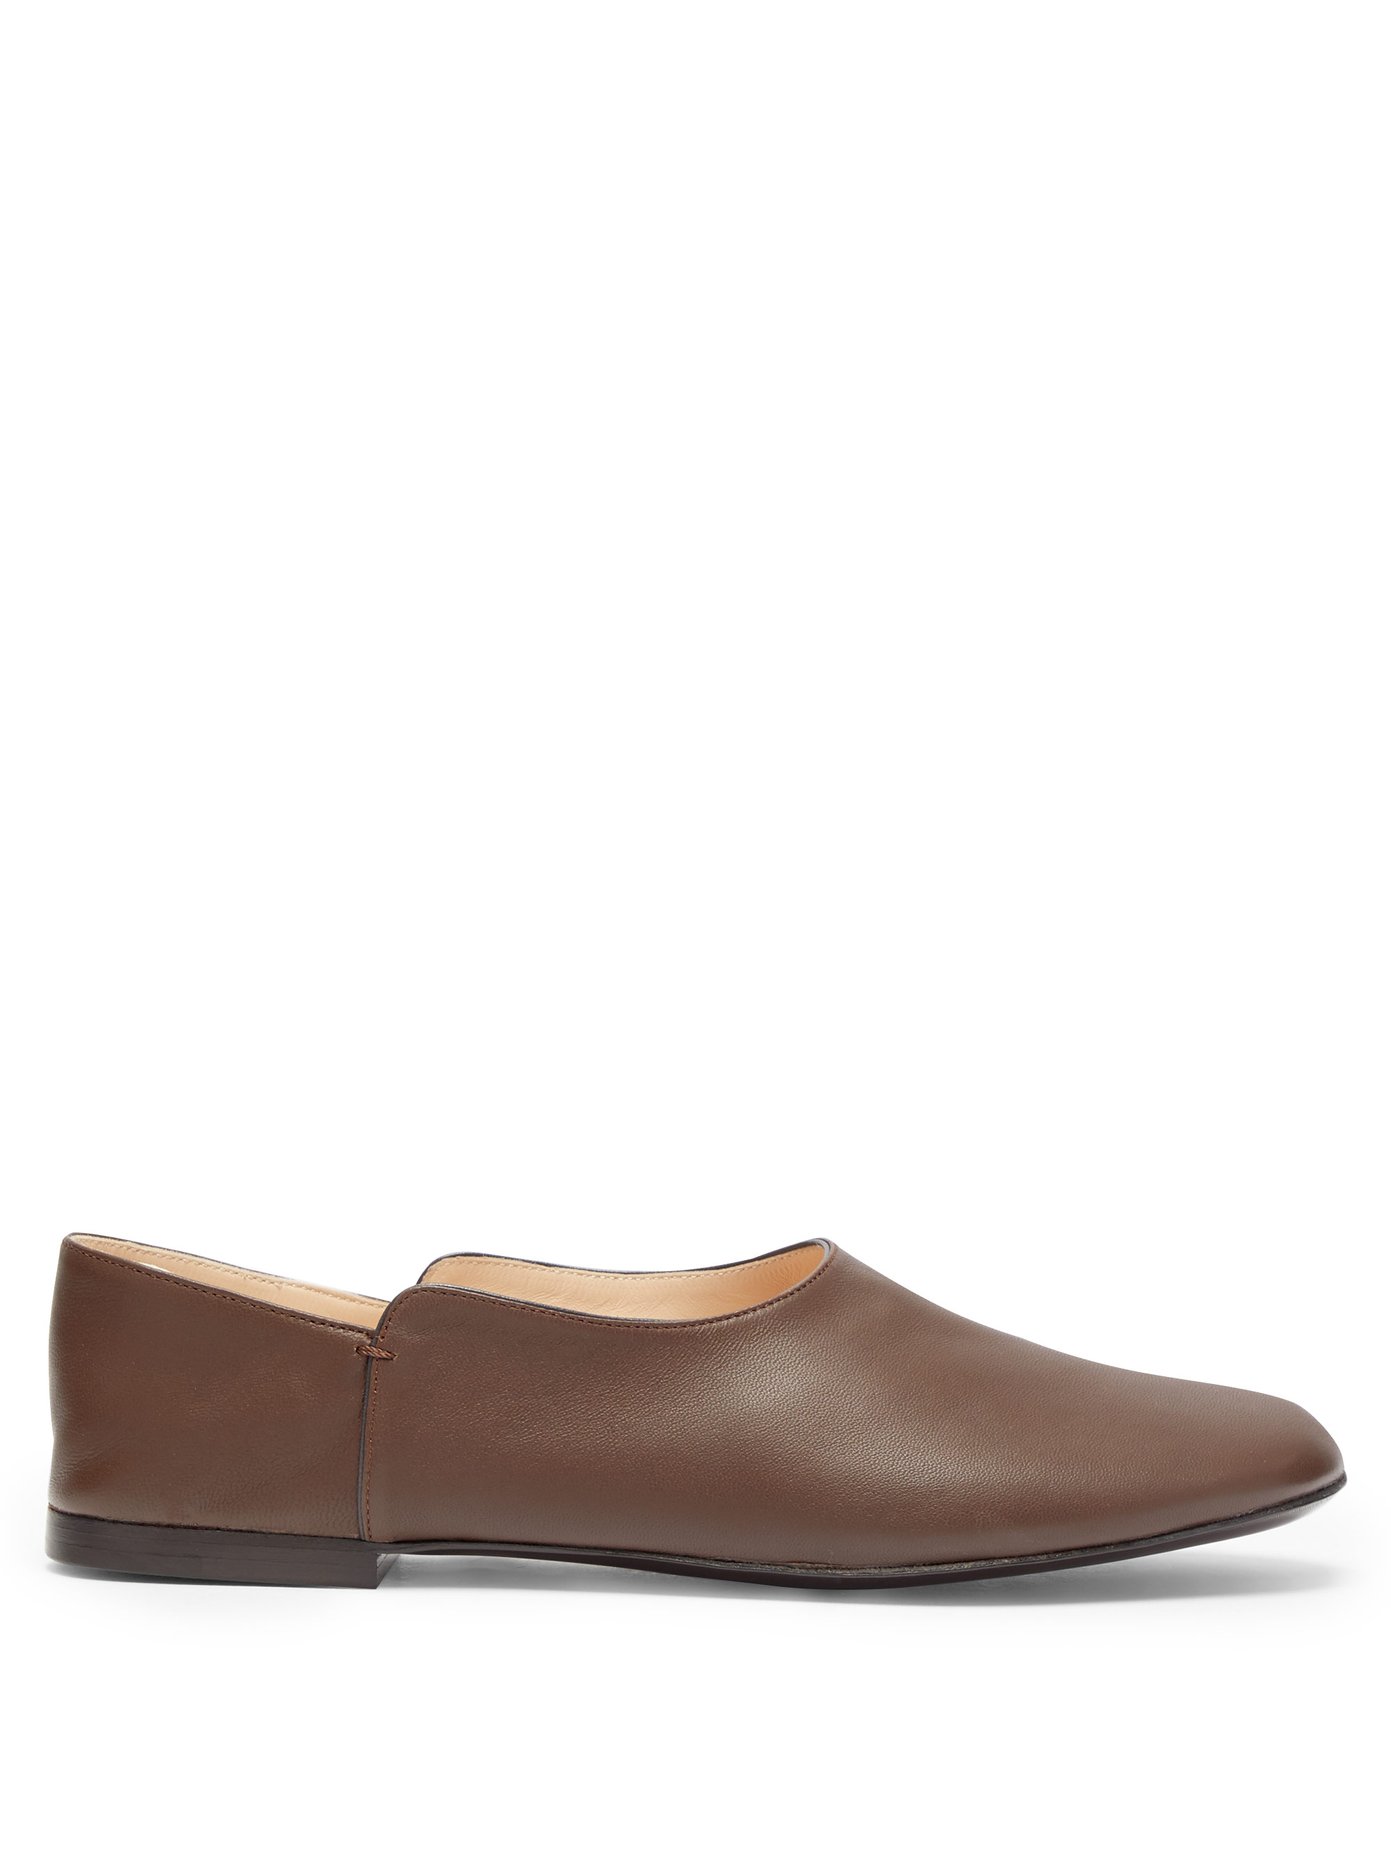 Boheme leather loafers | The Row 